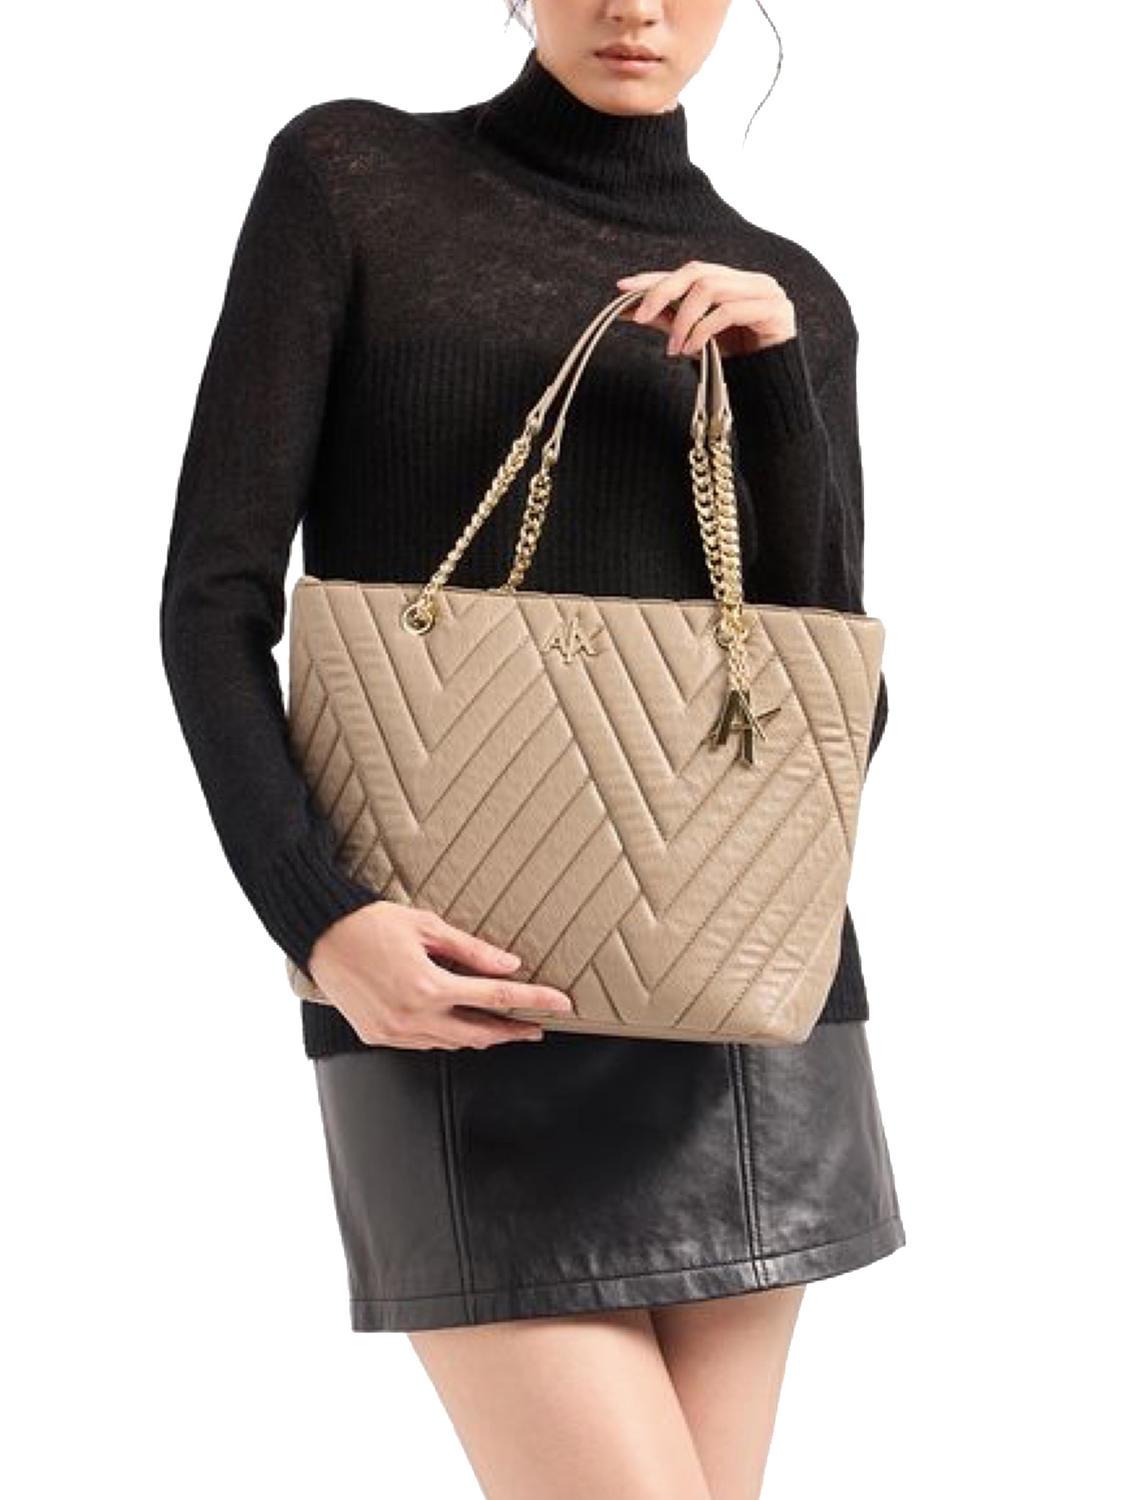 Armani Exchange Quilted Shopping Bag Internship - Buy At Outlet Prices!